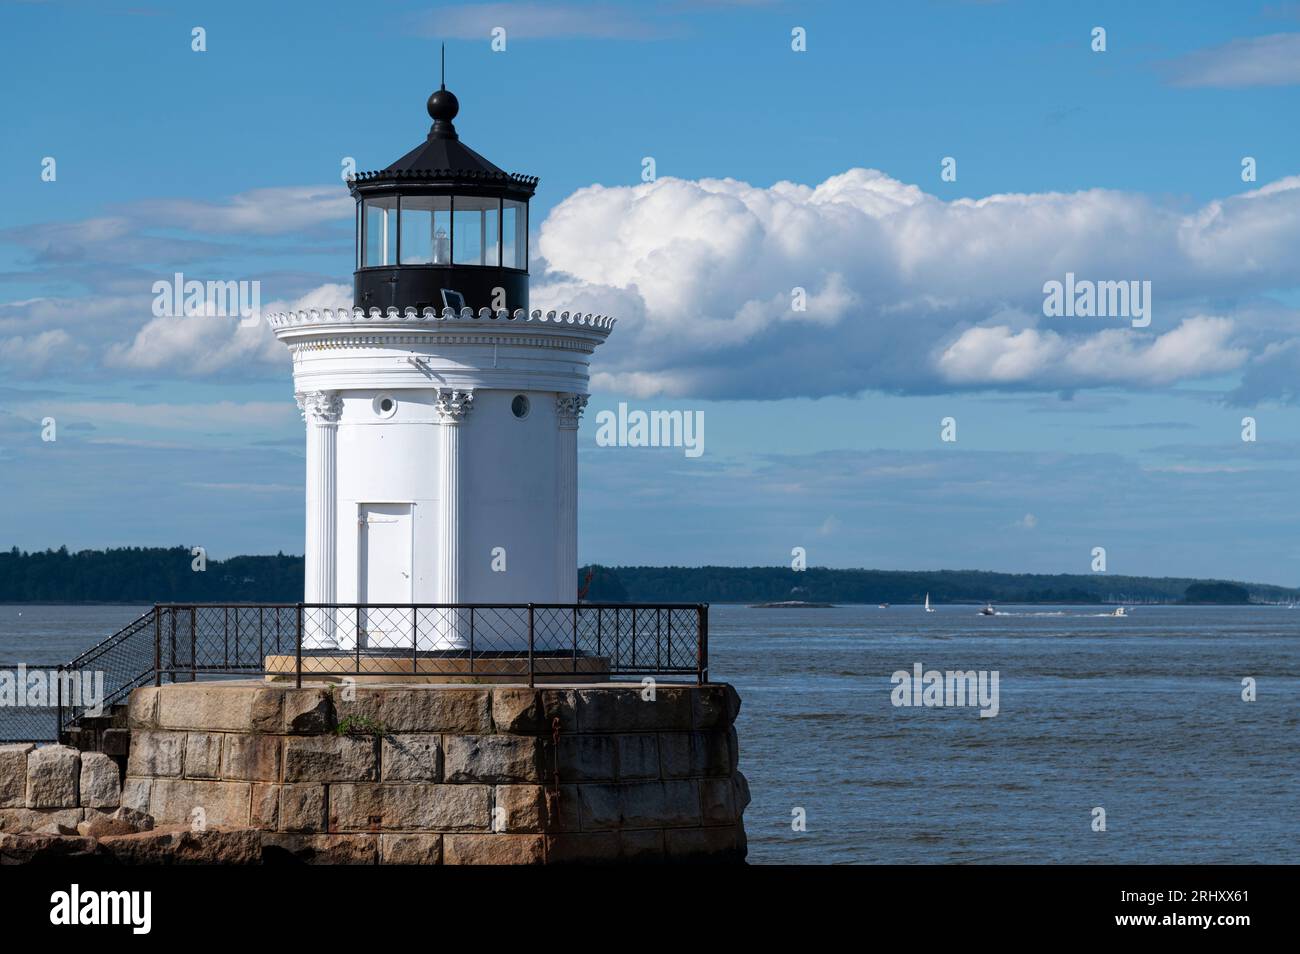 Portland Breakwater Lighthouse, also known as 'Bug Light' for its size, overlooks the entrance to Portland Harbor in Maine on a tranquil summer day. Stock Photo